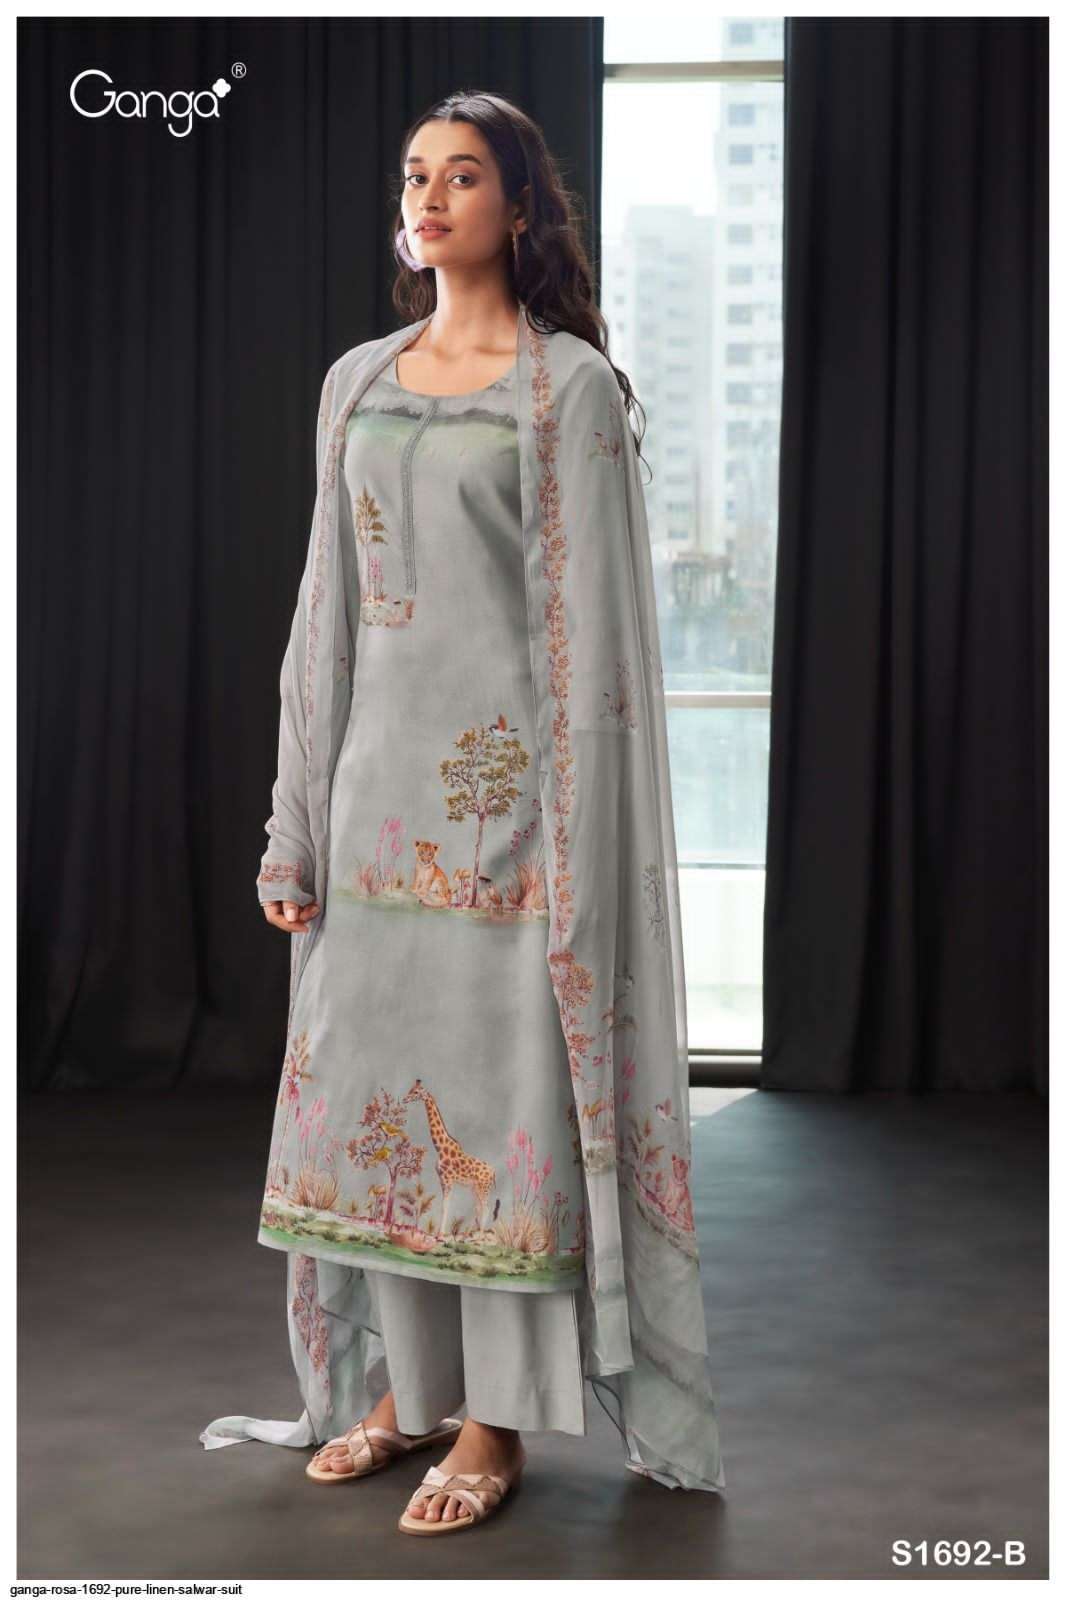 GANGA ROSA 1692 DESIGNER LINEN PRINTED EMBROIDERY AND HANDWORK HEAVY SUITS WHOLESALE 